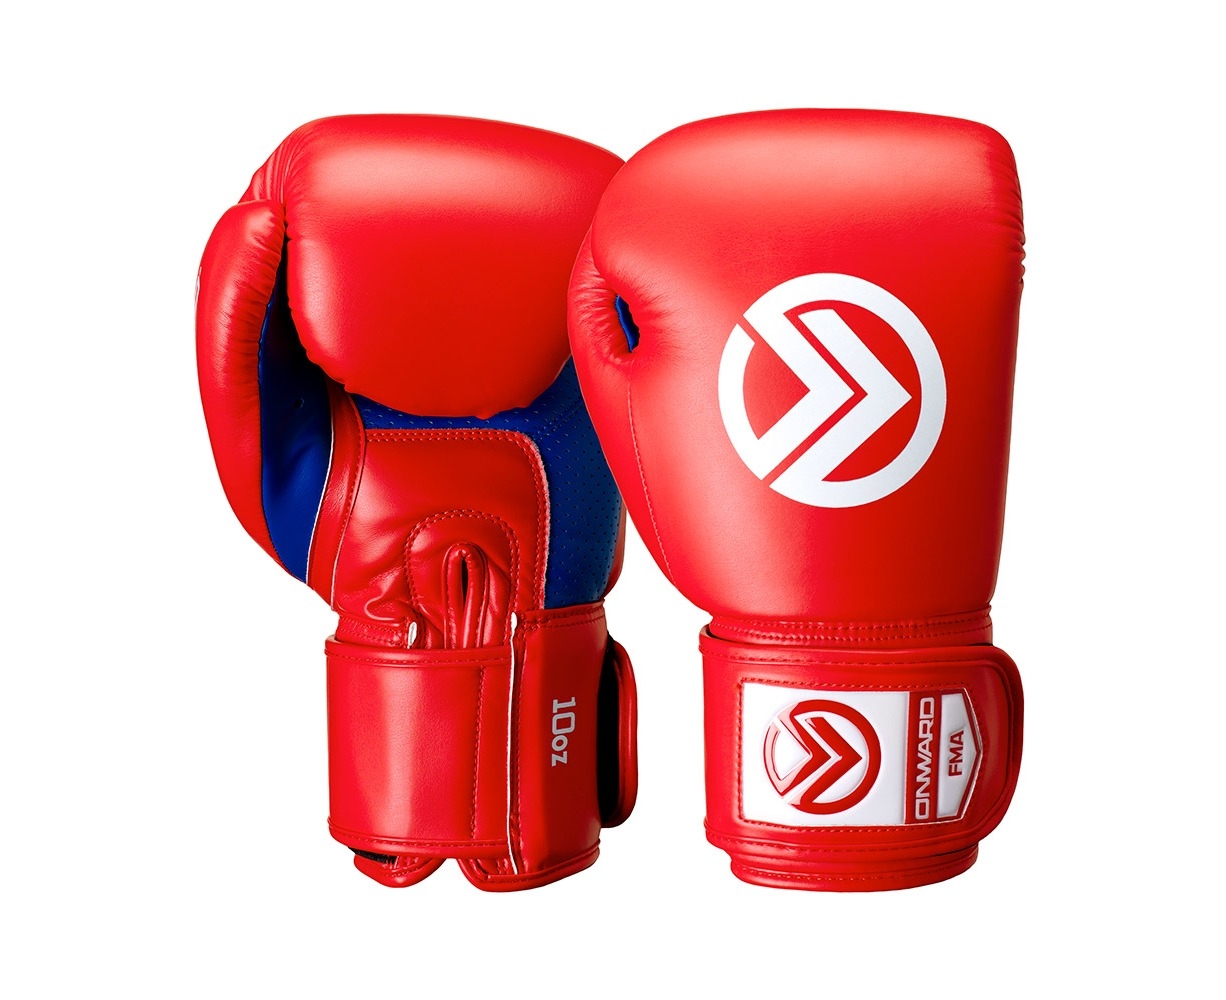 Onward Sabre Boxing Glove - Hook And Loop Boxing Gloves – Sparring,  Training, Heavy Bag, Boxing, Kickboxing, Muay Thai, Mma Gloves - Red